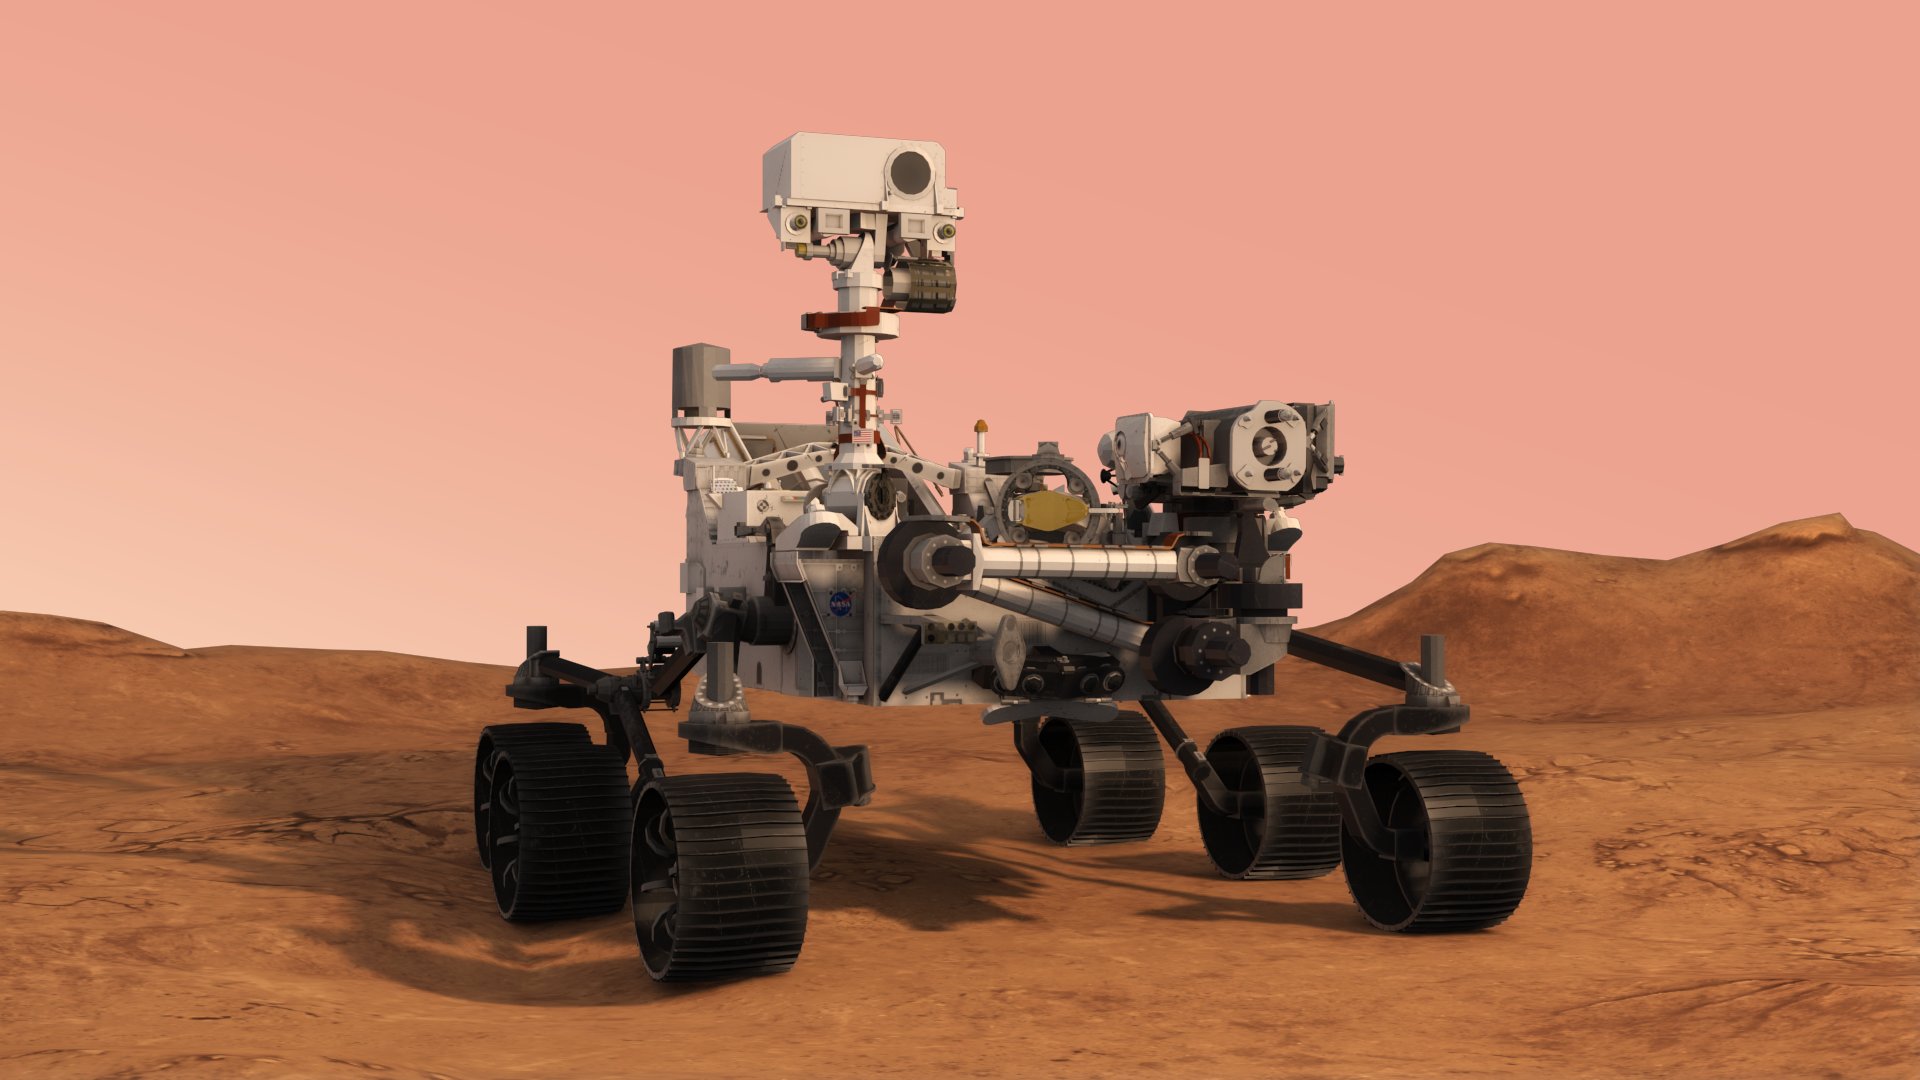 Perseverance rover in augmented realityusatoday.com